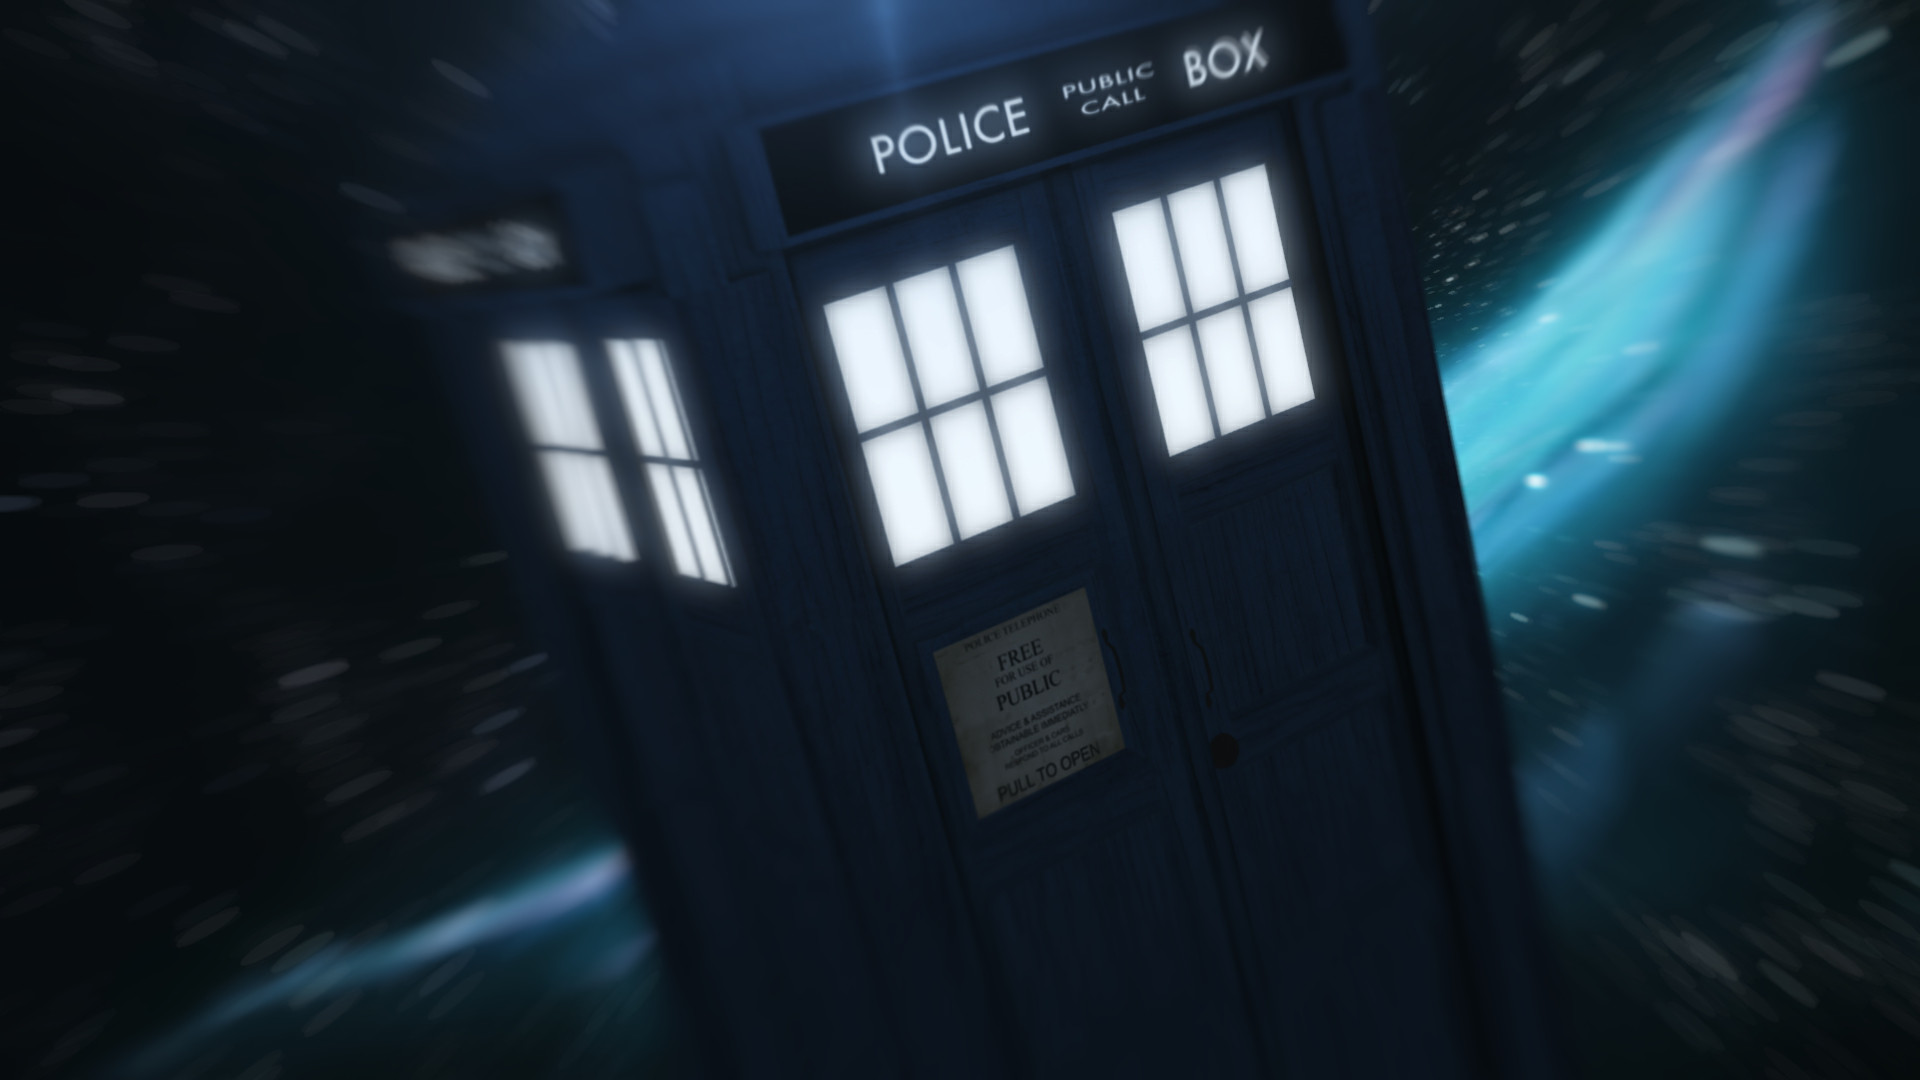 1920x1080 doctor who crack wallpaper Doctor Who Crack Wallpaper, Full HDQ Doctor Who  Pictures and Wallpapers